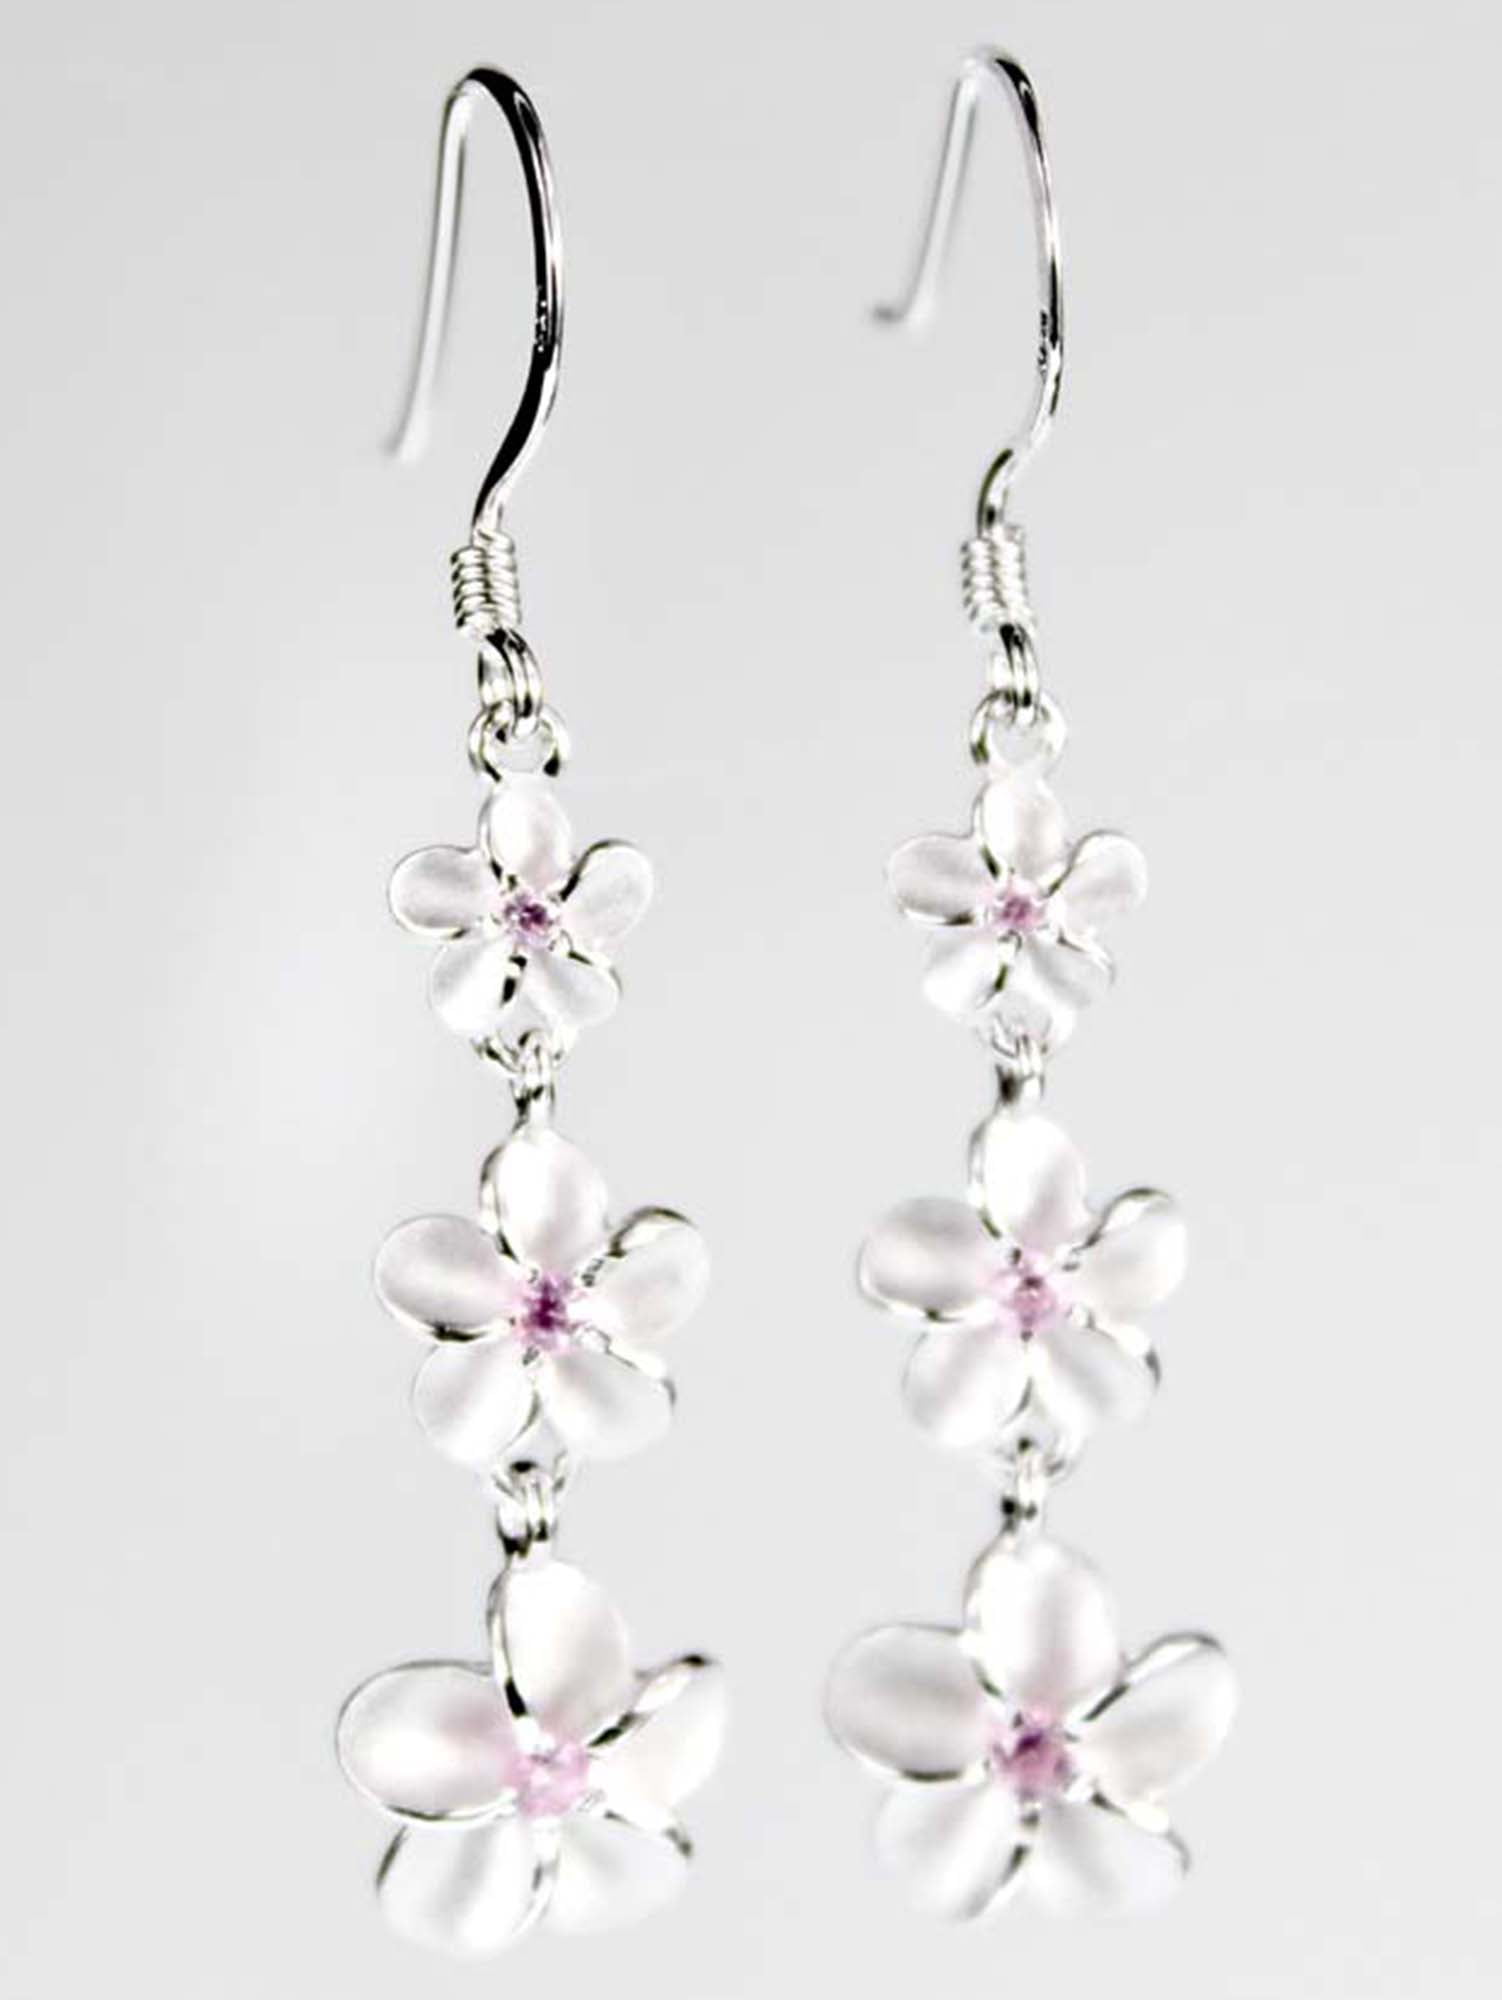 NEW.. A PAIR OF DANGLY BLACK/PINK BEAD EARRINGS WITH 925 SOLID SILVER HOOKS